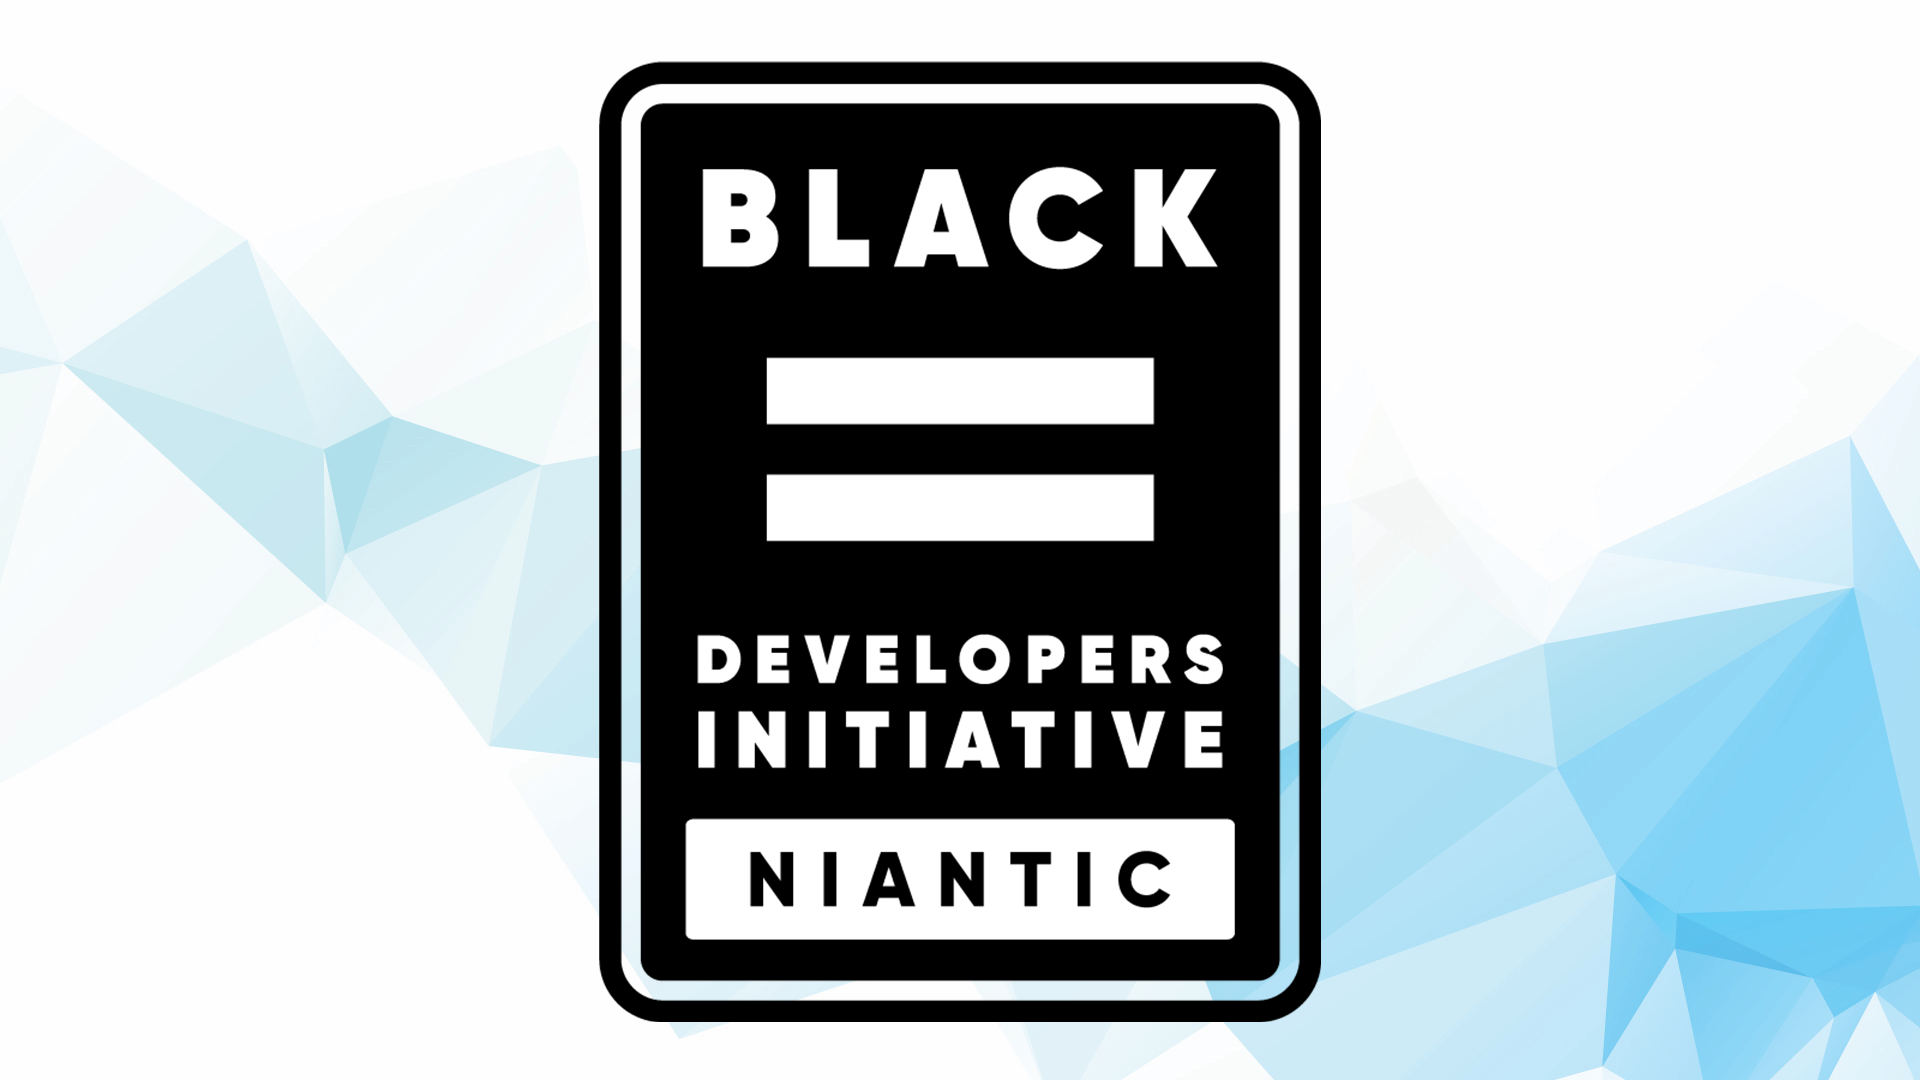 Image for Pokemon Go maker Niantic launches initiative to help Black game developers